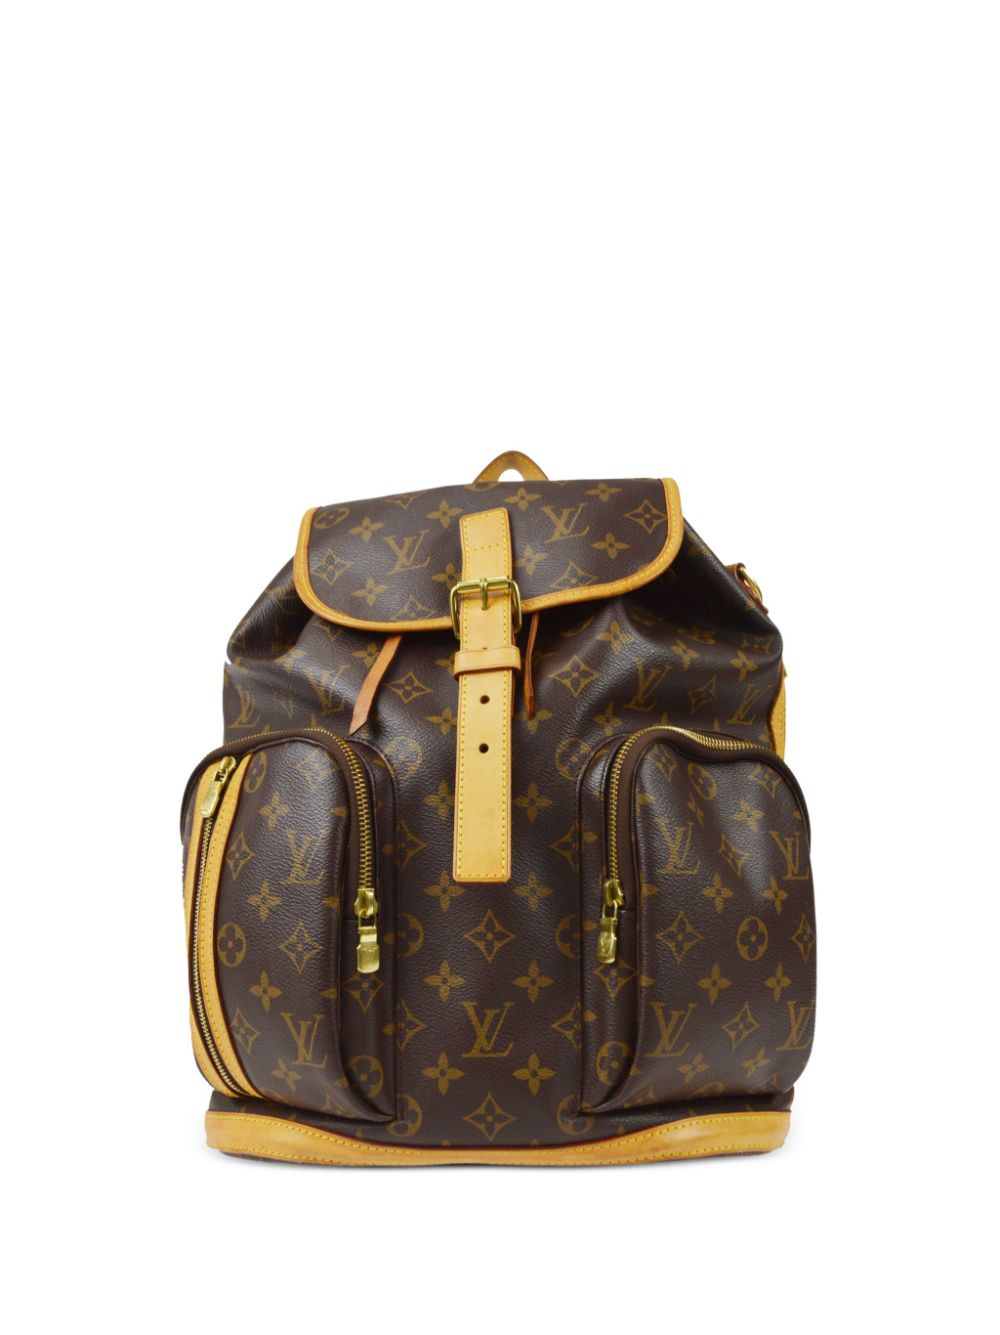 Louis Vuitton 2014 pre-owned Monogram Sac a Dos Bosphore backpack